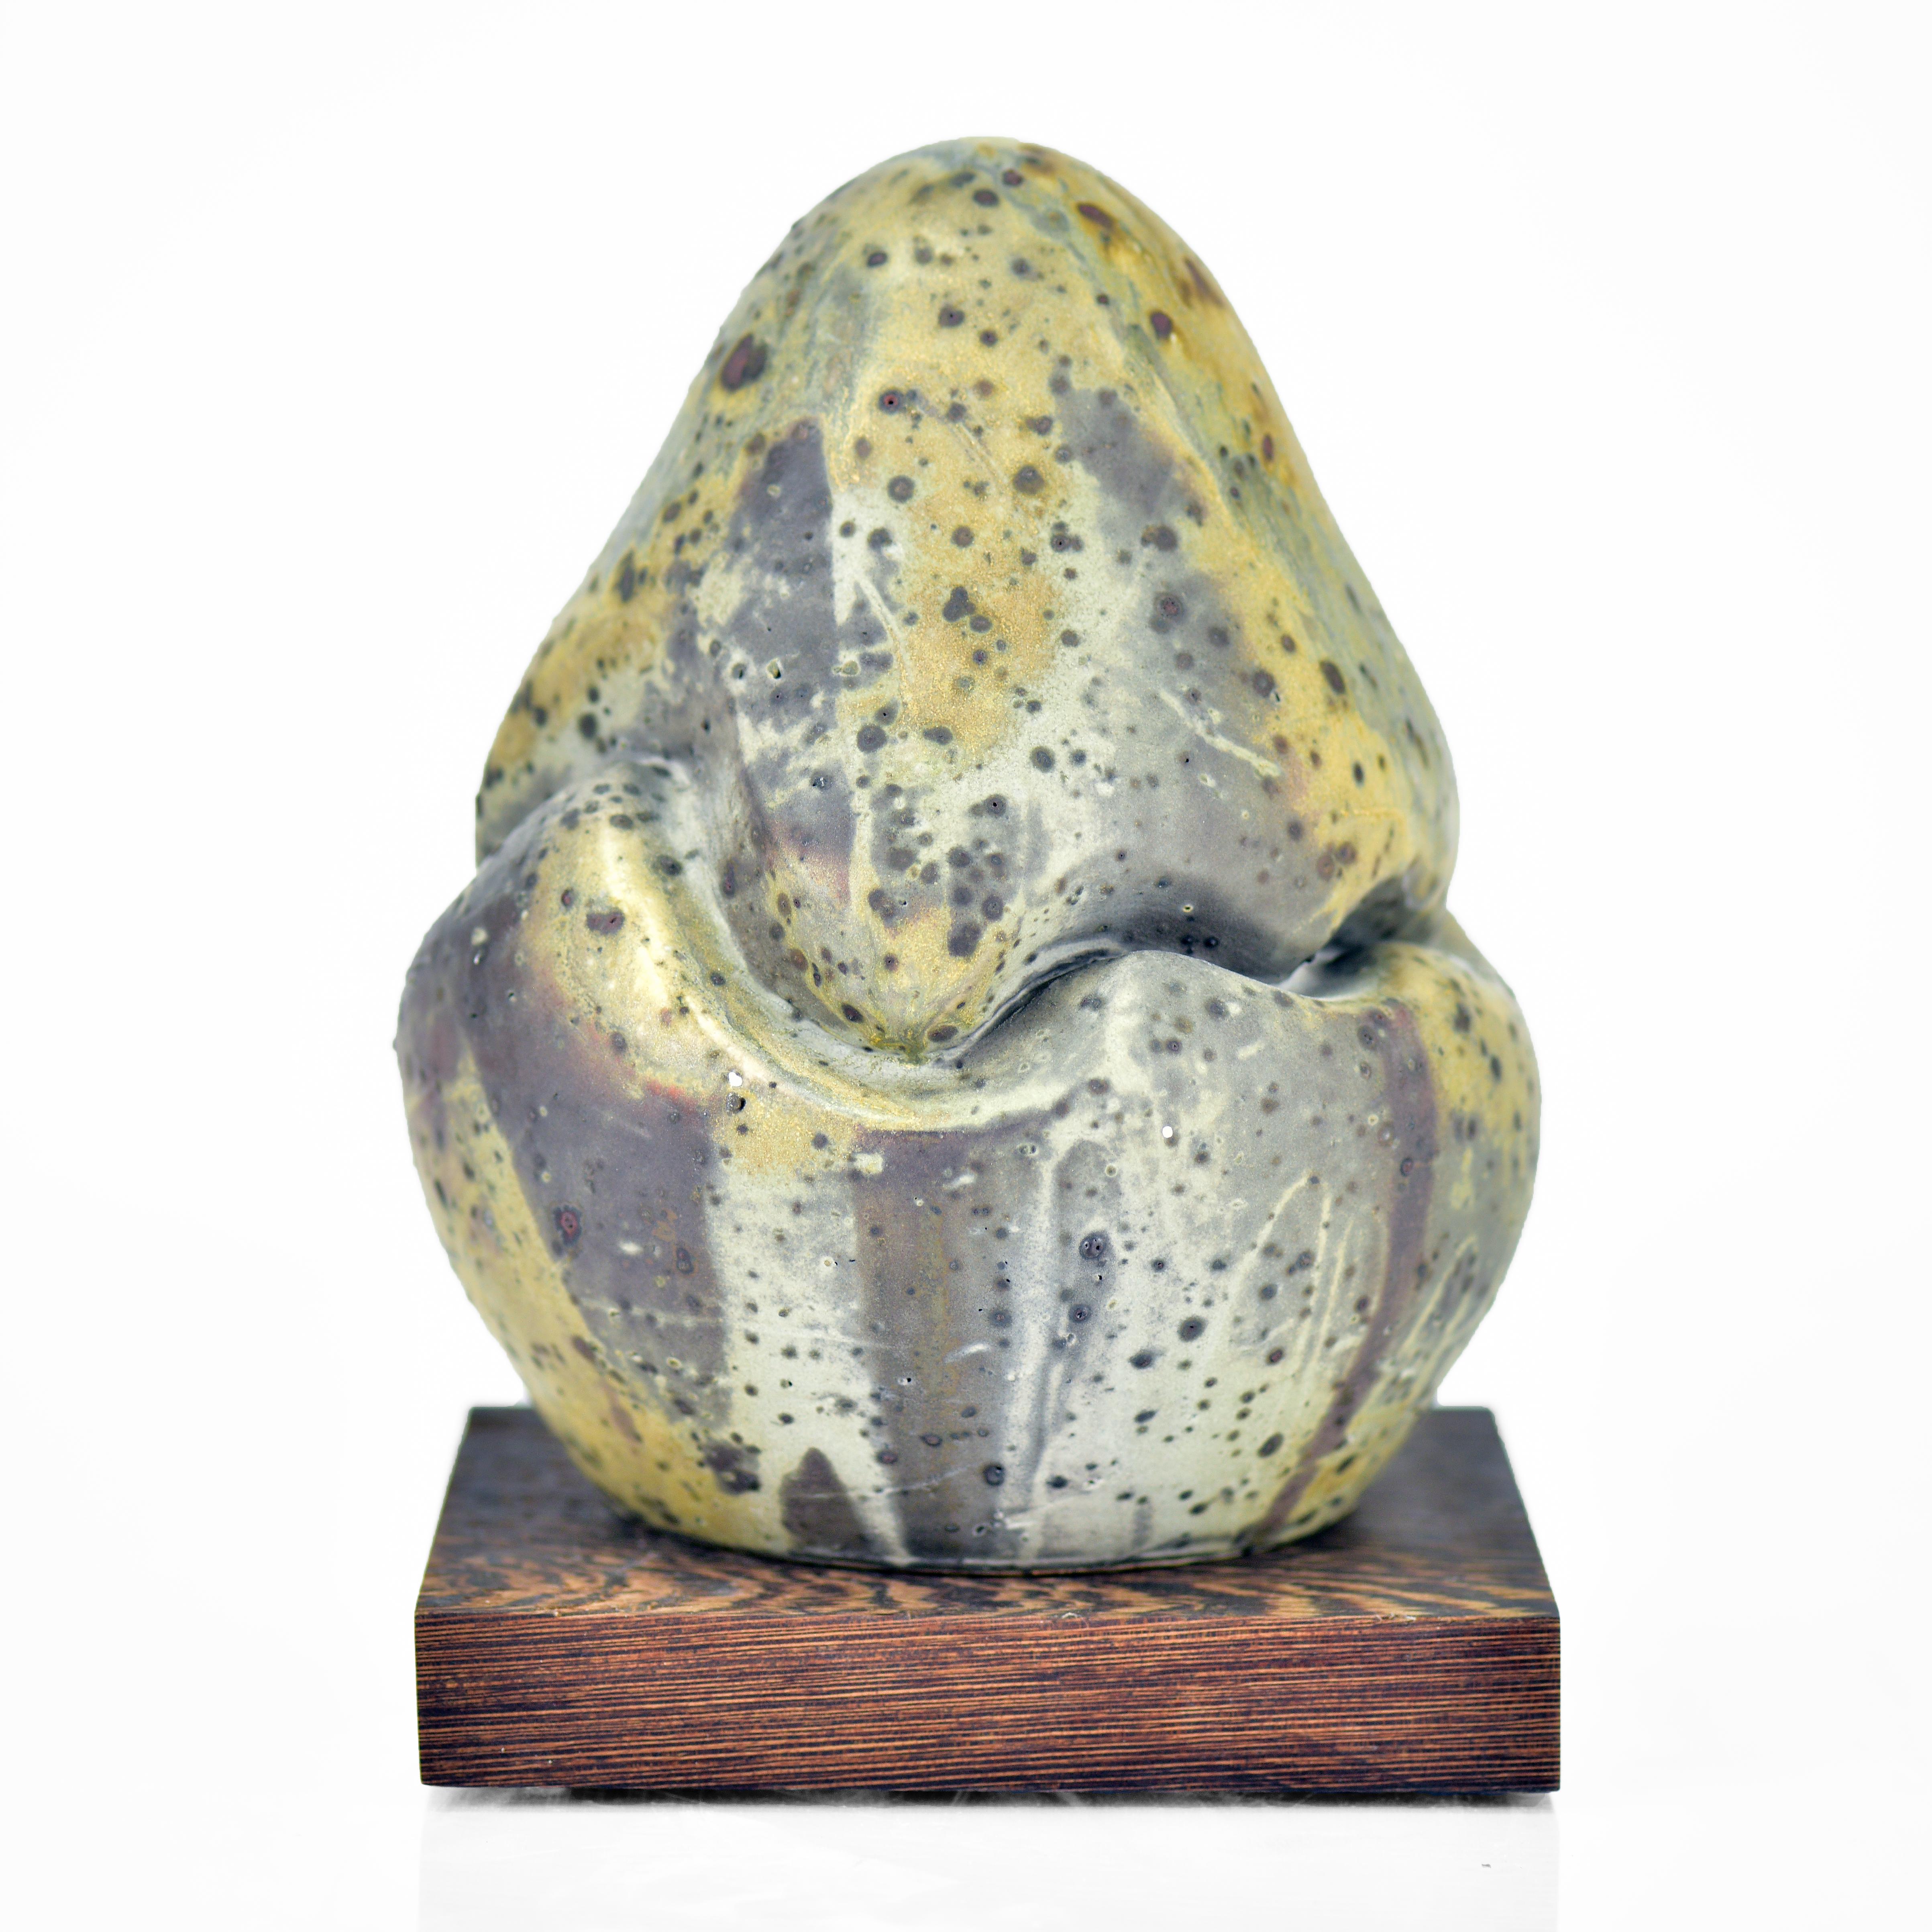 Perry Haas Abstract Sculpture - "Droplet 1918", Contemporary, Porcelain, Sculpture, Shino Glaze, Wood Fired